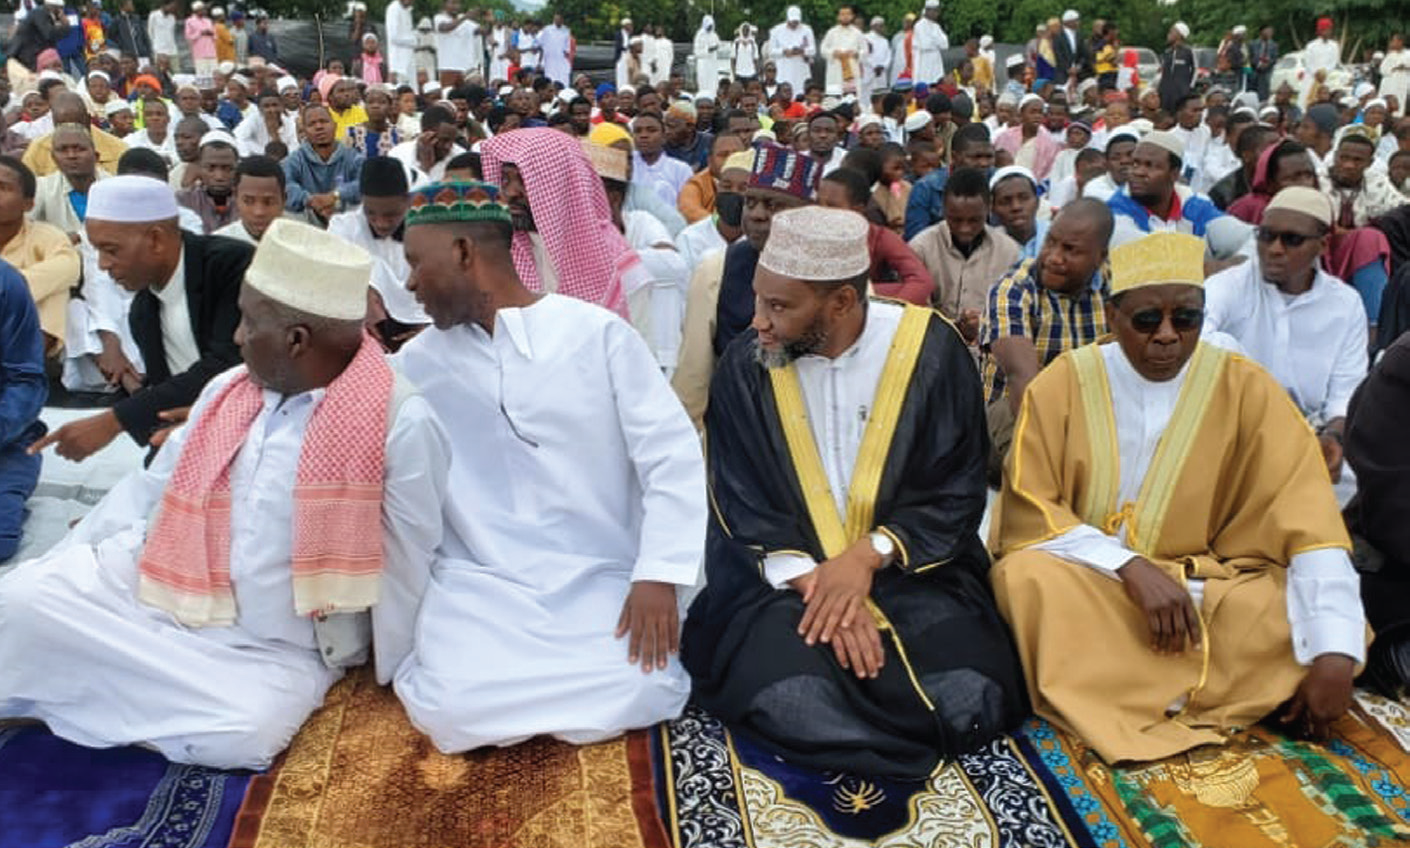 Muslims celebrate Eid, call for co-existence